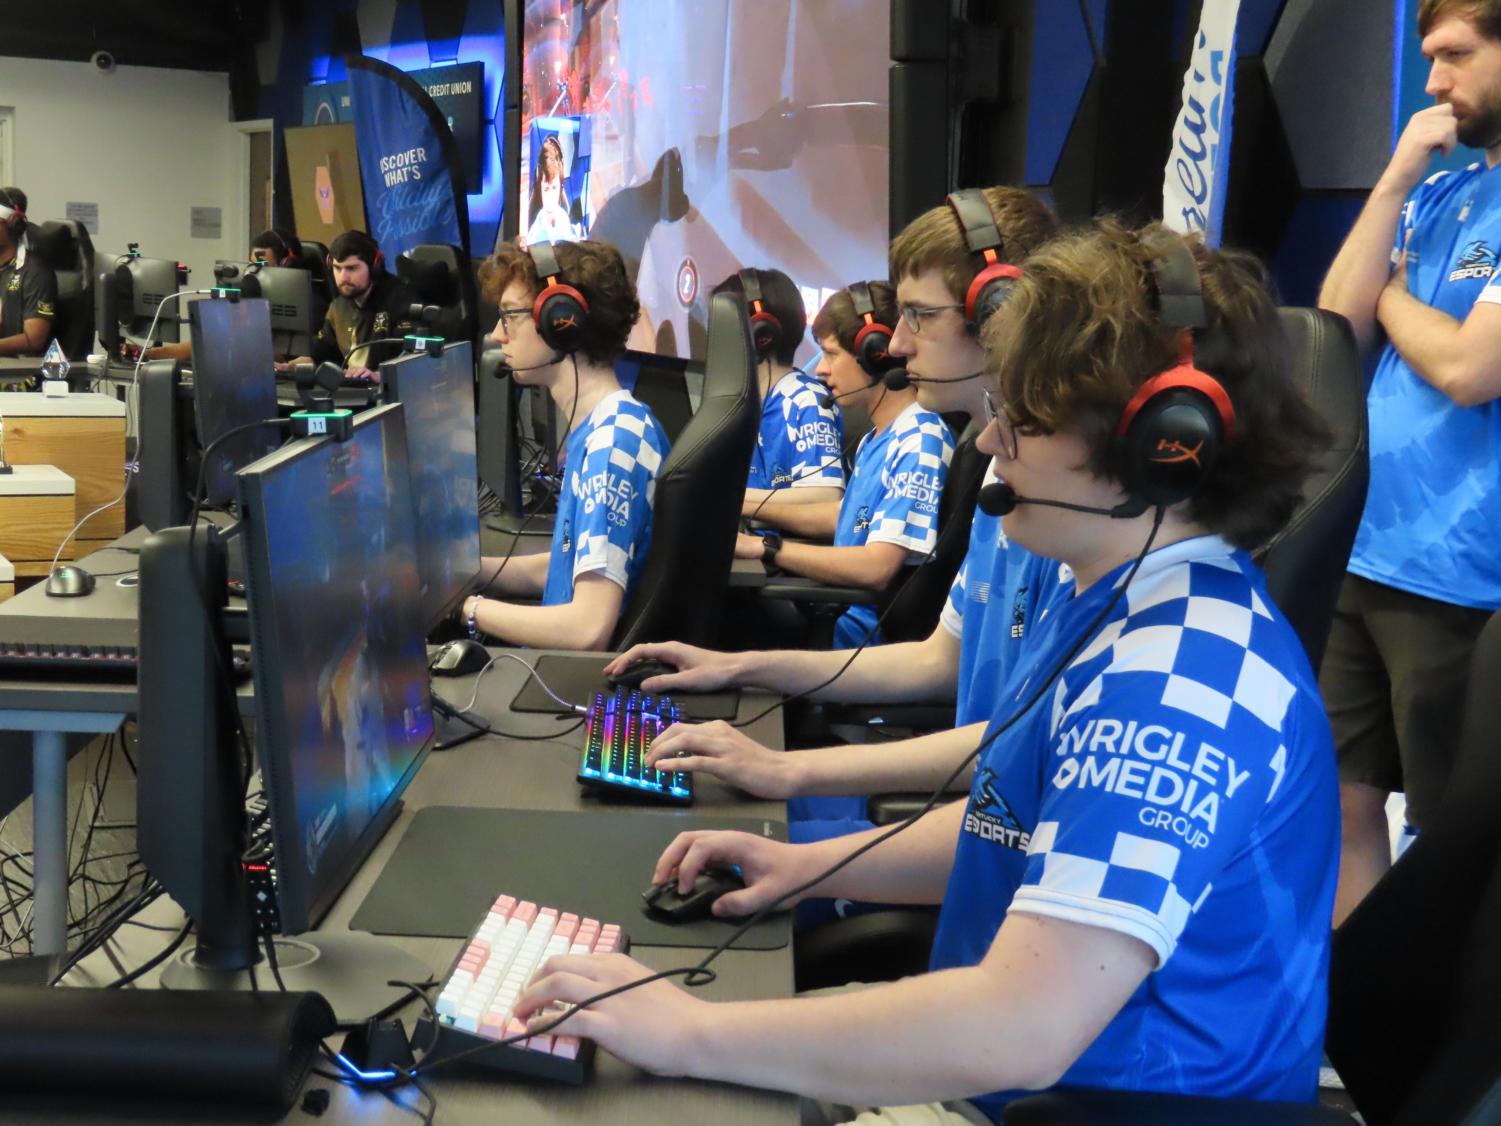 Kentucky esports raises hundreds for charity with Louisville in Governor’s Cup showdown